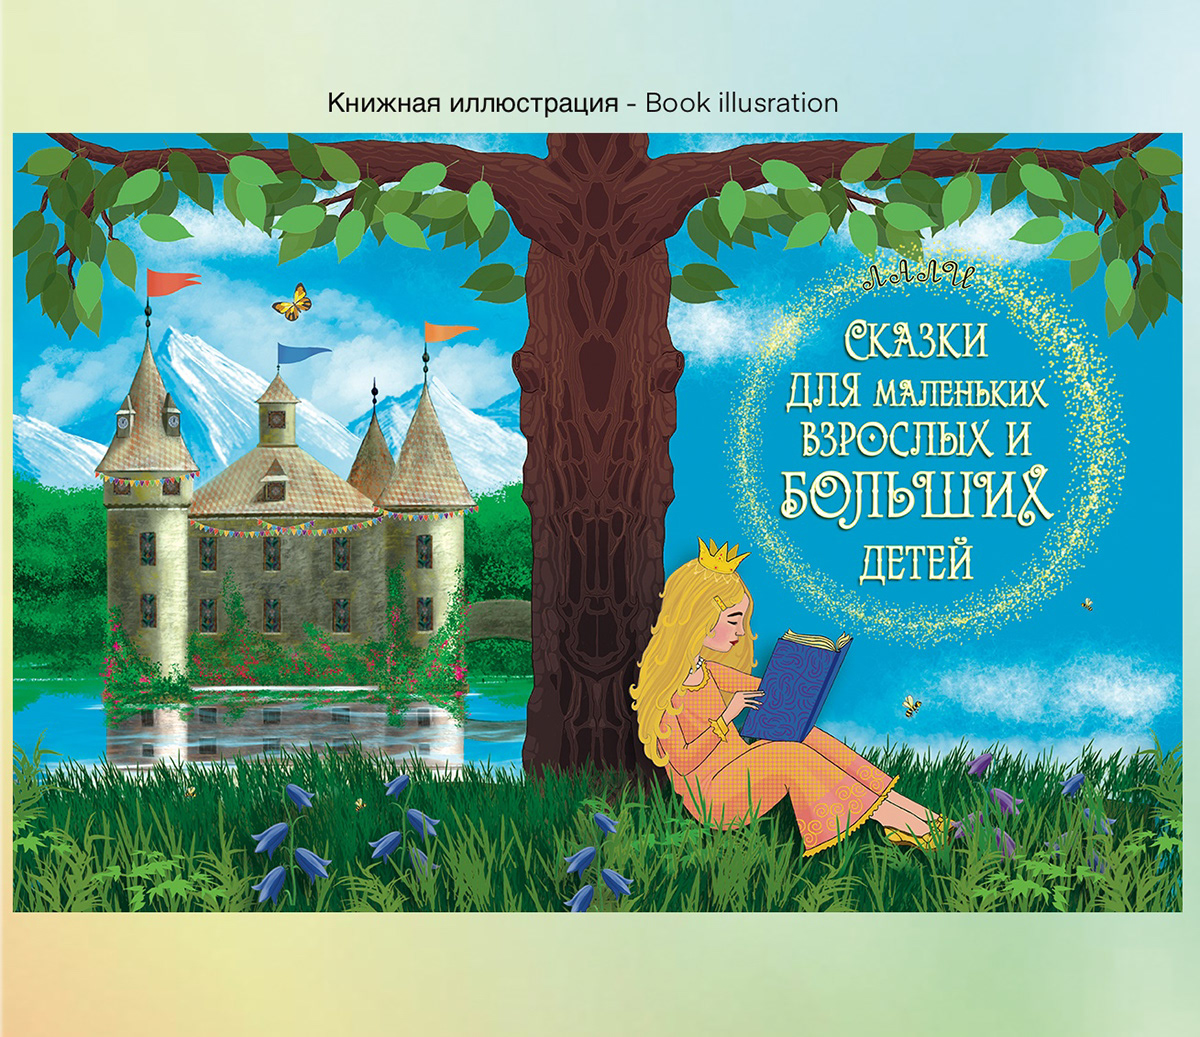 A fairy tale for small adults and big children. The author is Lali. I was illustrating a book.